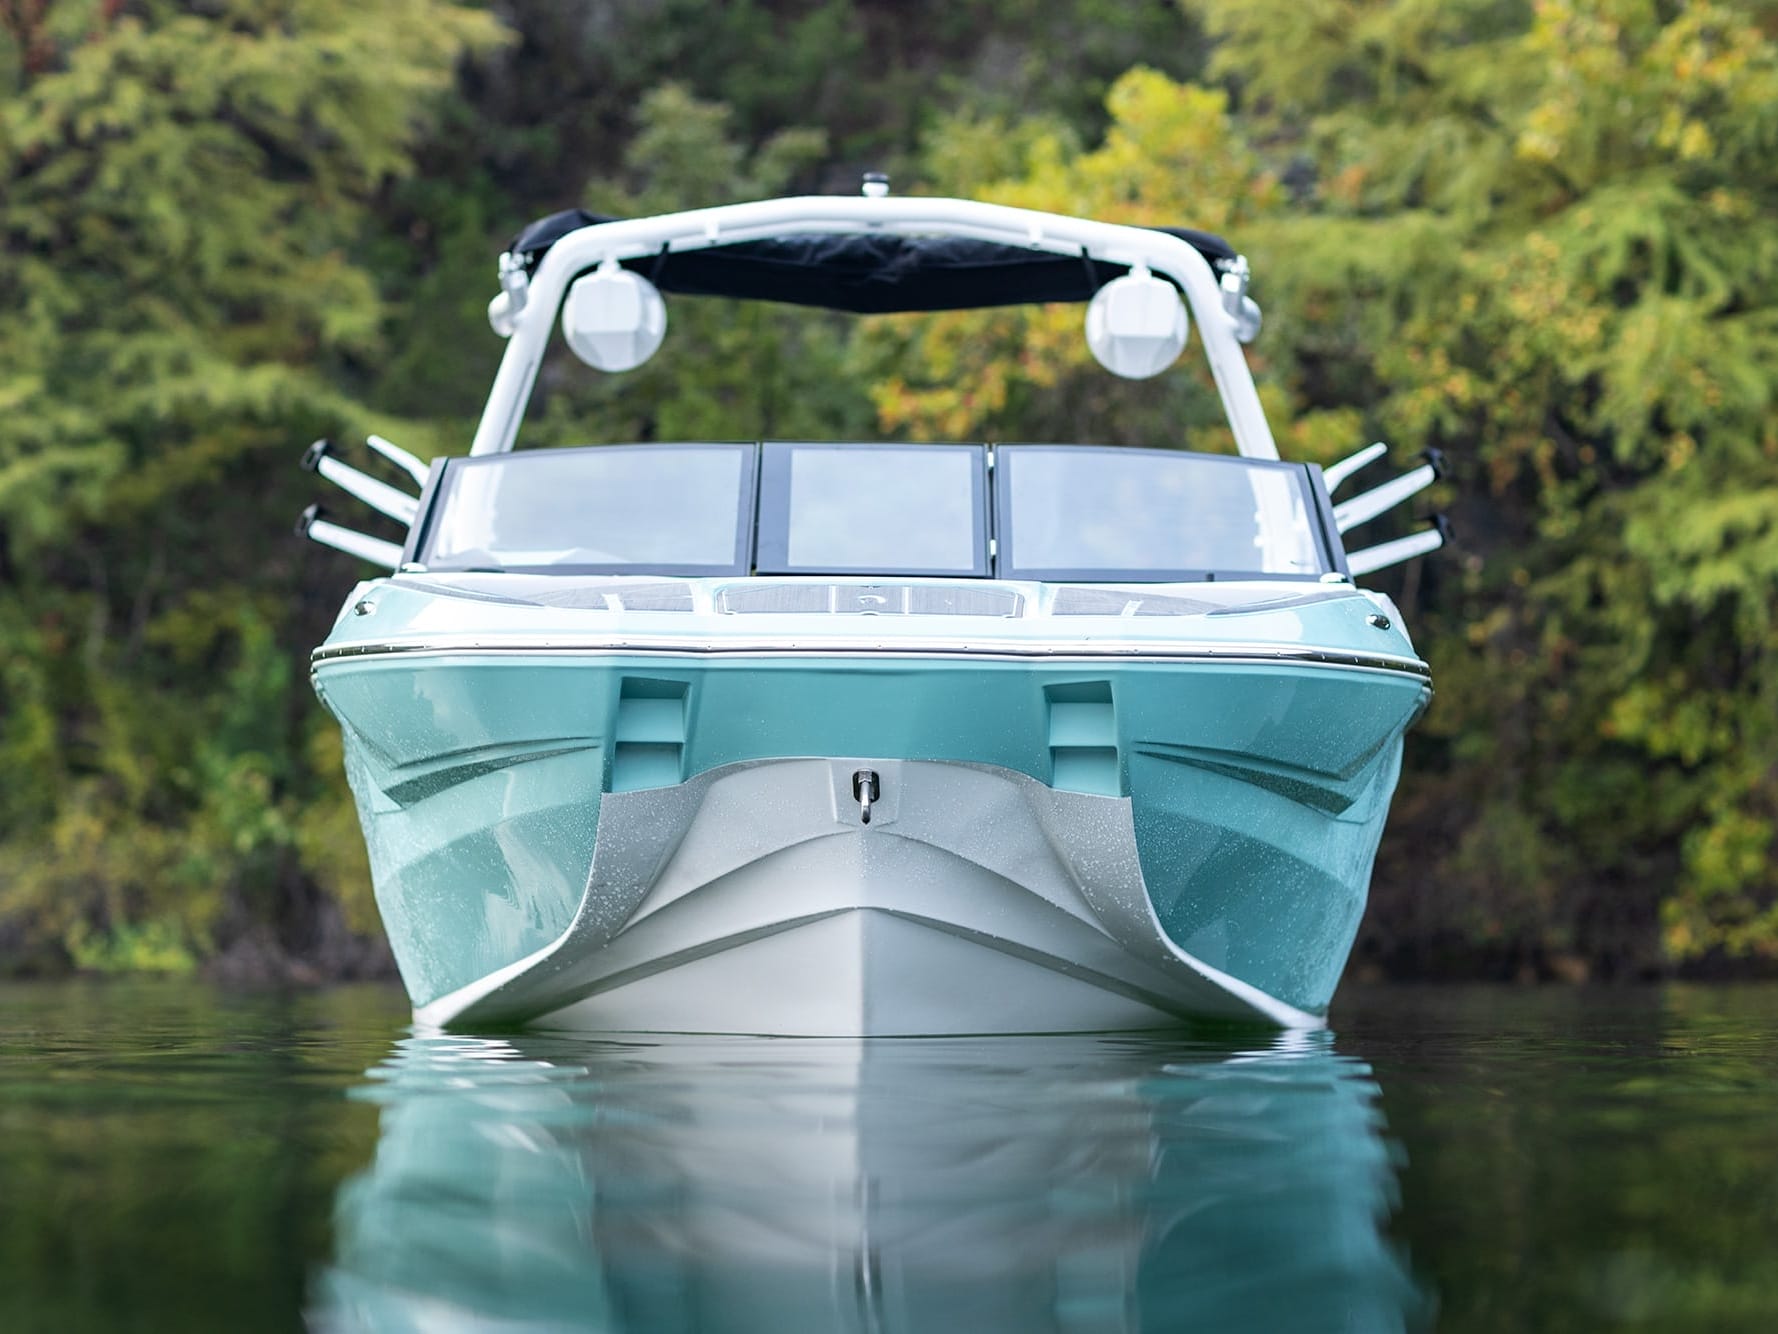 A blue and white Centurion Fe22 boat is floating in a body of water.